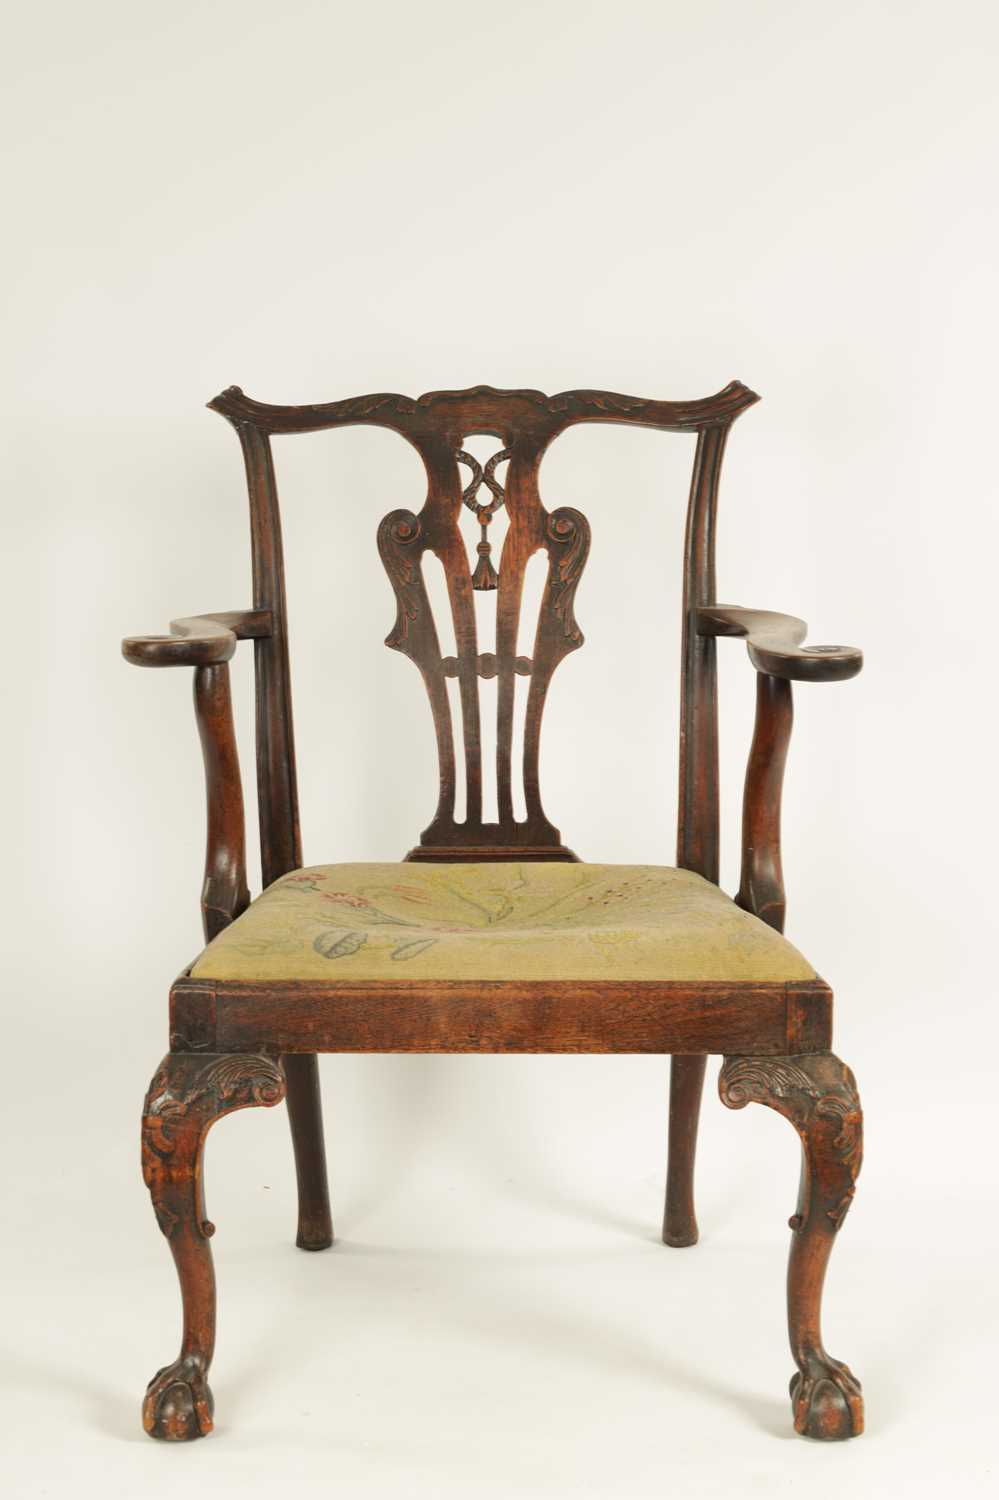 A MID 18TH CENTURY WALNUT OPEN ARMCHAIR IN THE MANNER OF CHIPPENDALE - Image 3 of 10